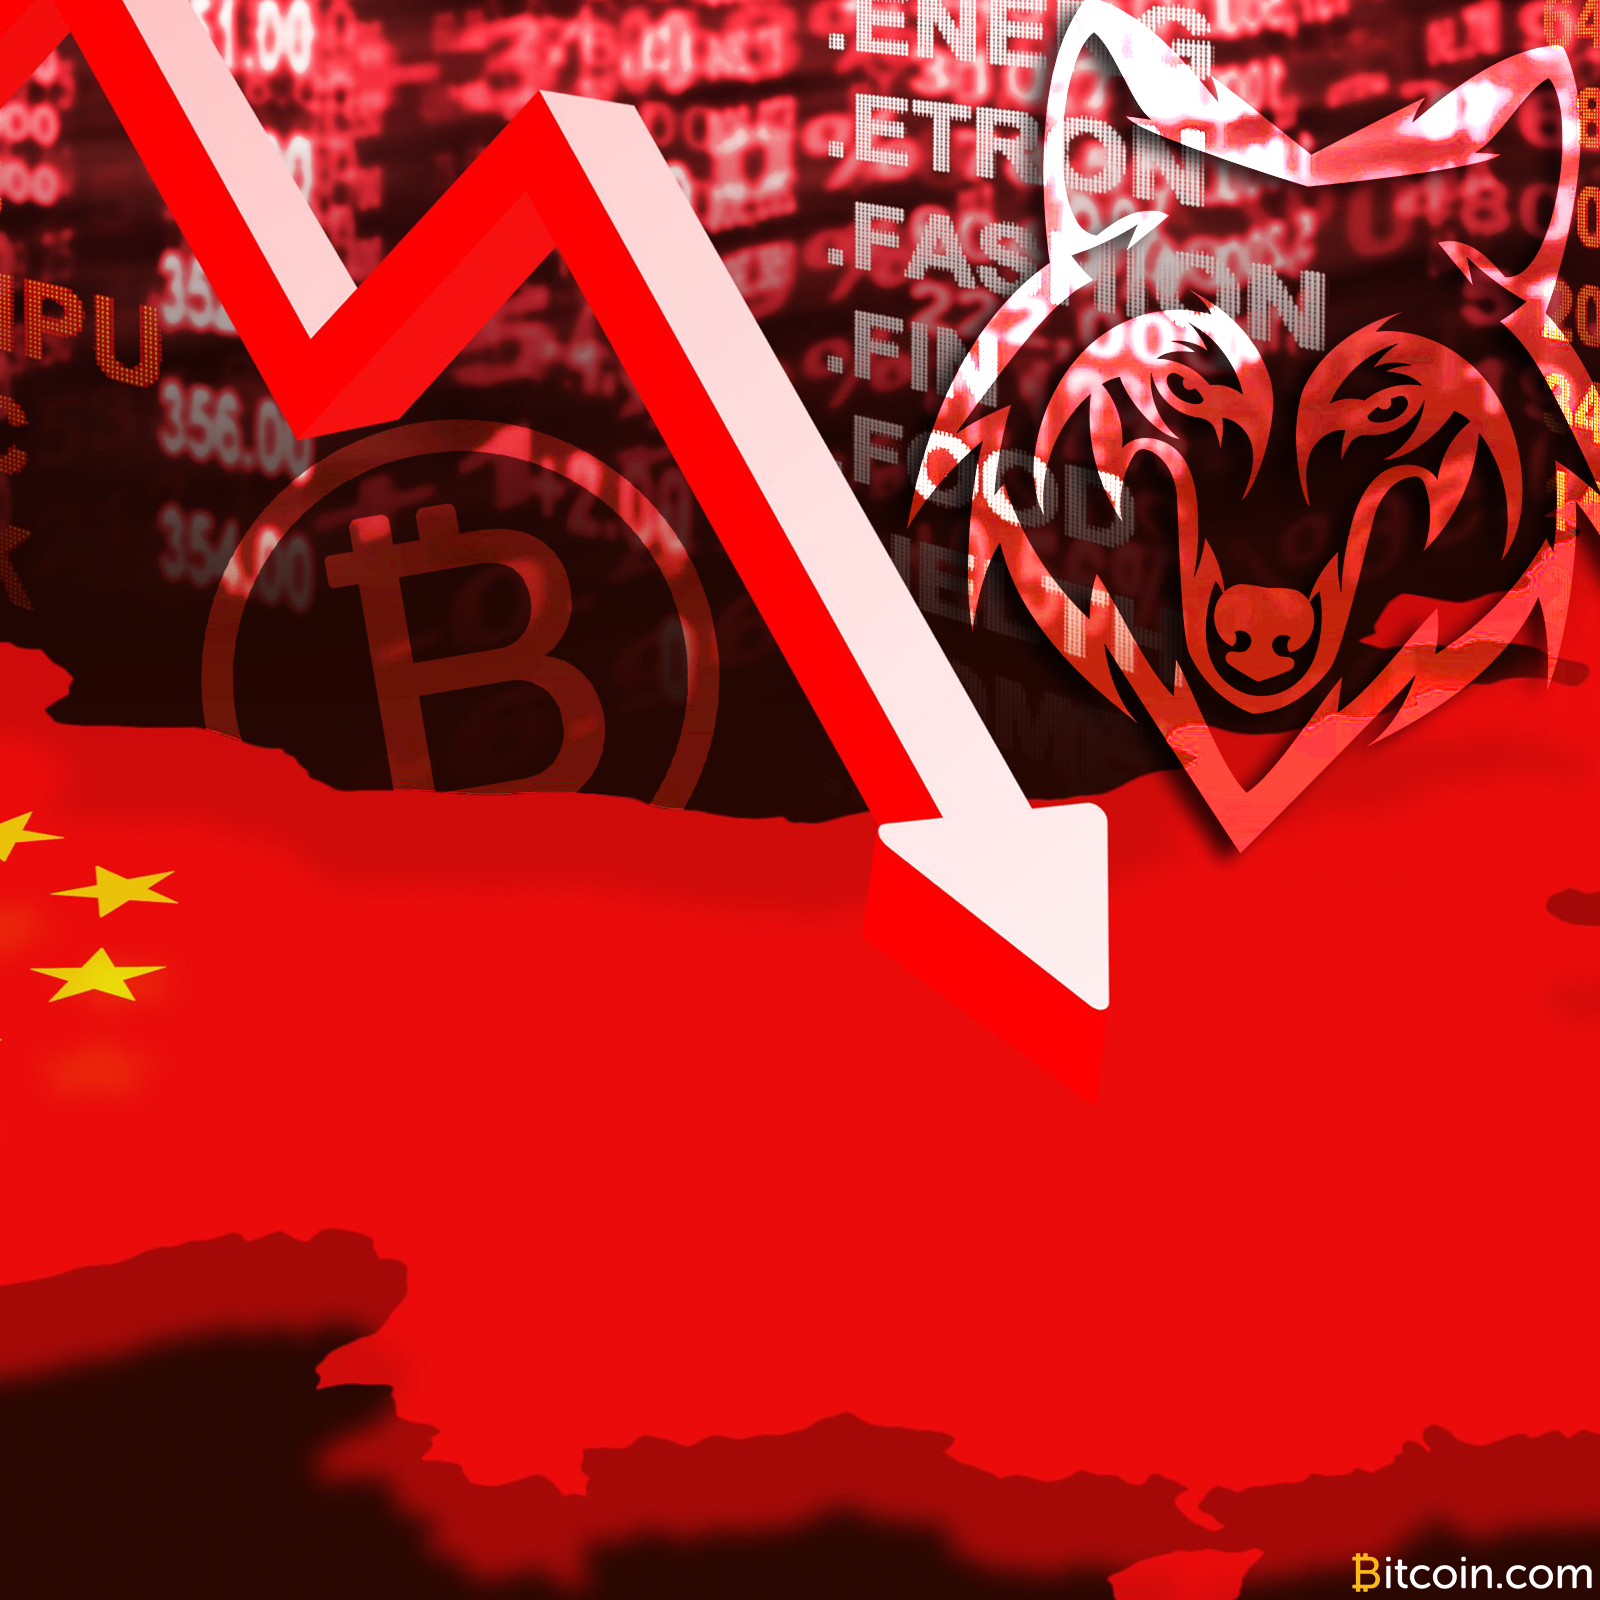 Markets Tumble Again - How Many Times can China Cry Wolf?